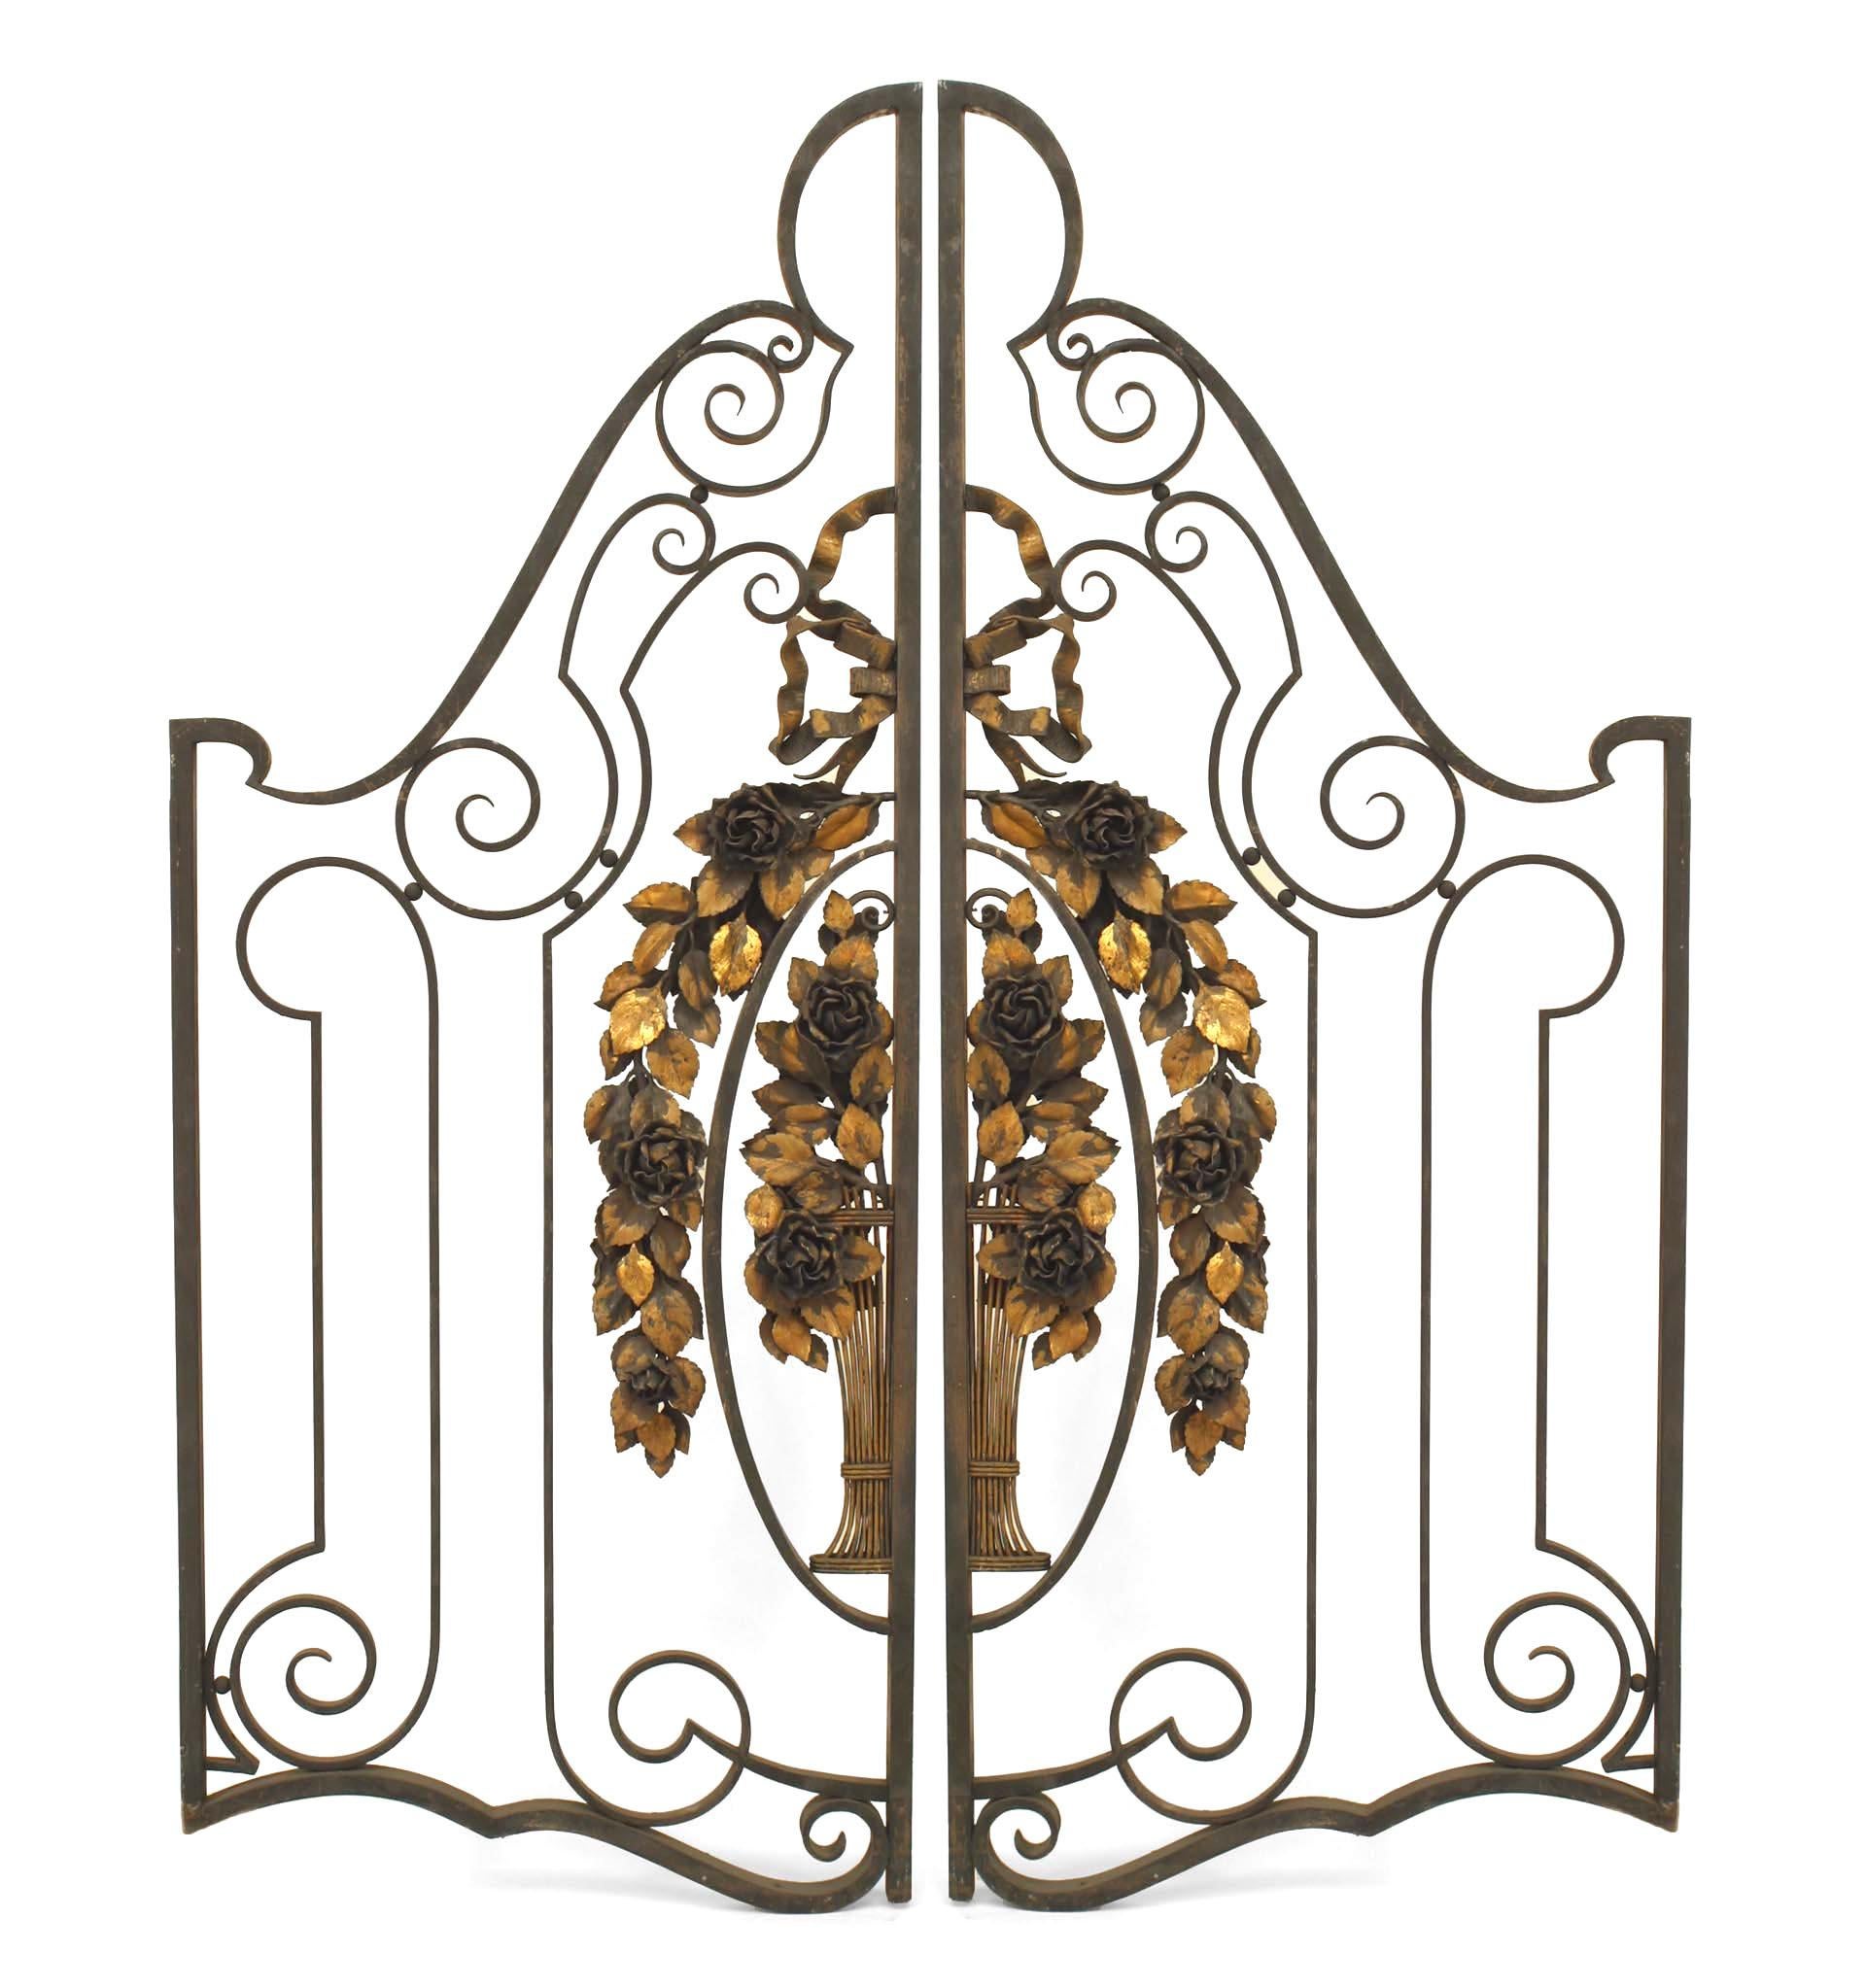 Pair of French Art Deco Gilt Trimmed Gates For Sale